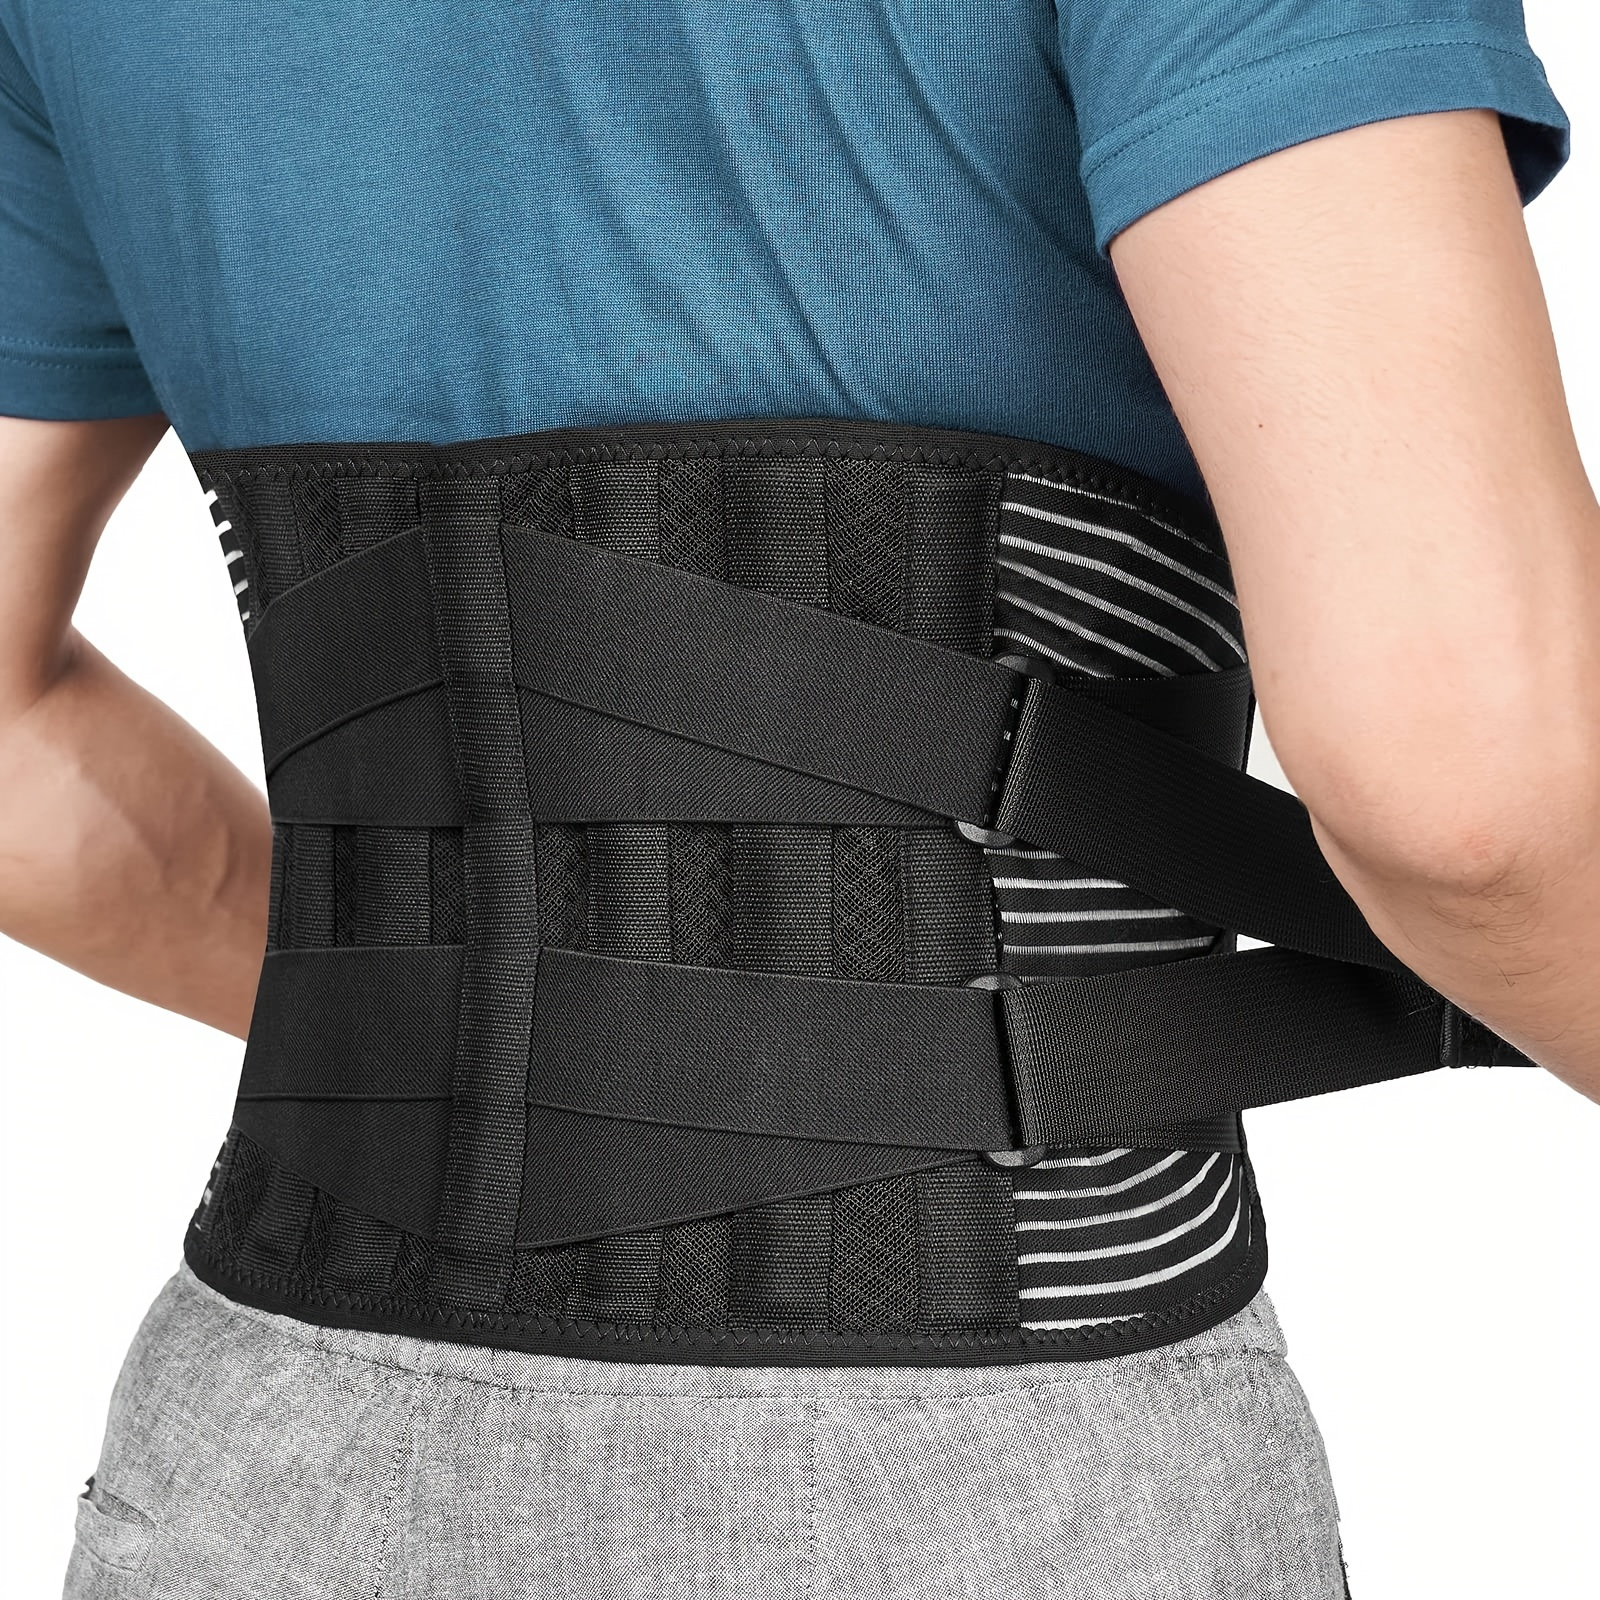 

1pc Breathable Back Brace With 6 Stays - Anti-skid Lumbar Support Belt For Sciatica, Herniated Disc, And Scoliosis